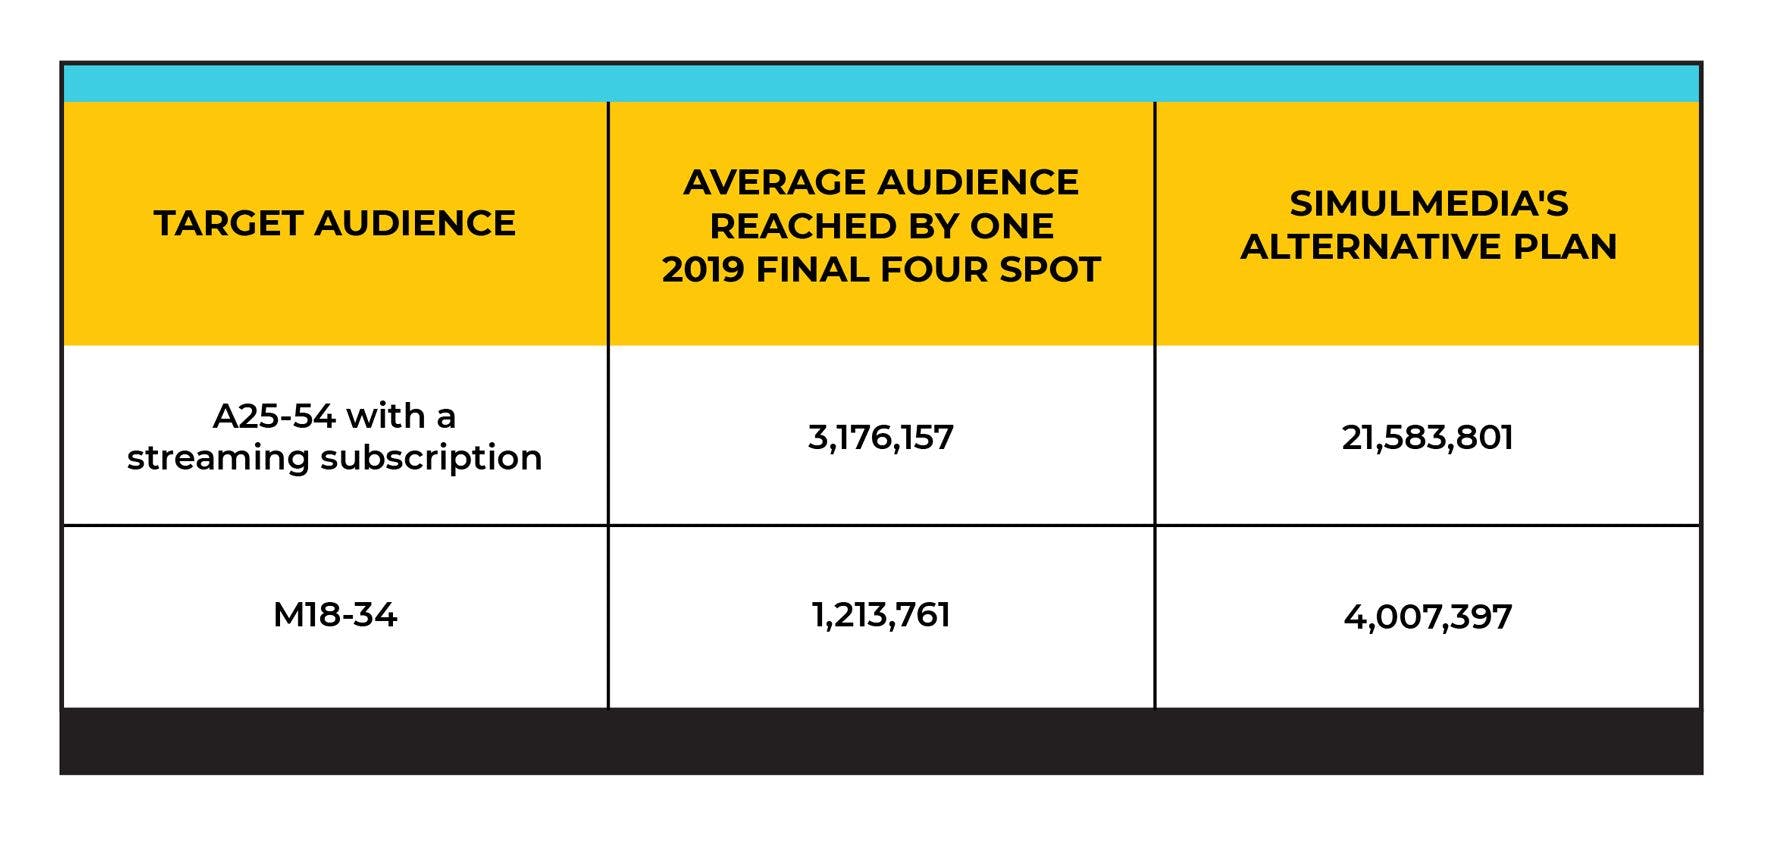 Audience reach for A25-54 with streaming subscription and M18-34 for Final Four and Simulmedia campaign.